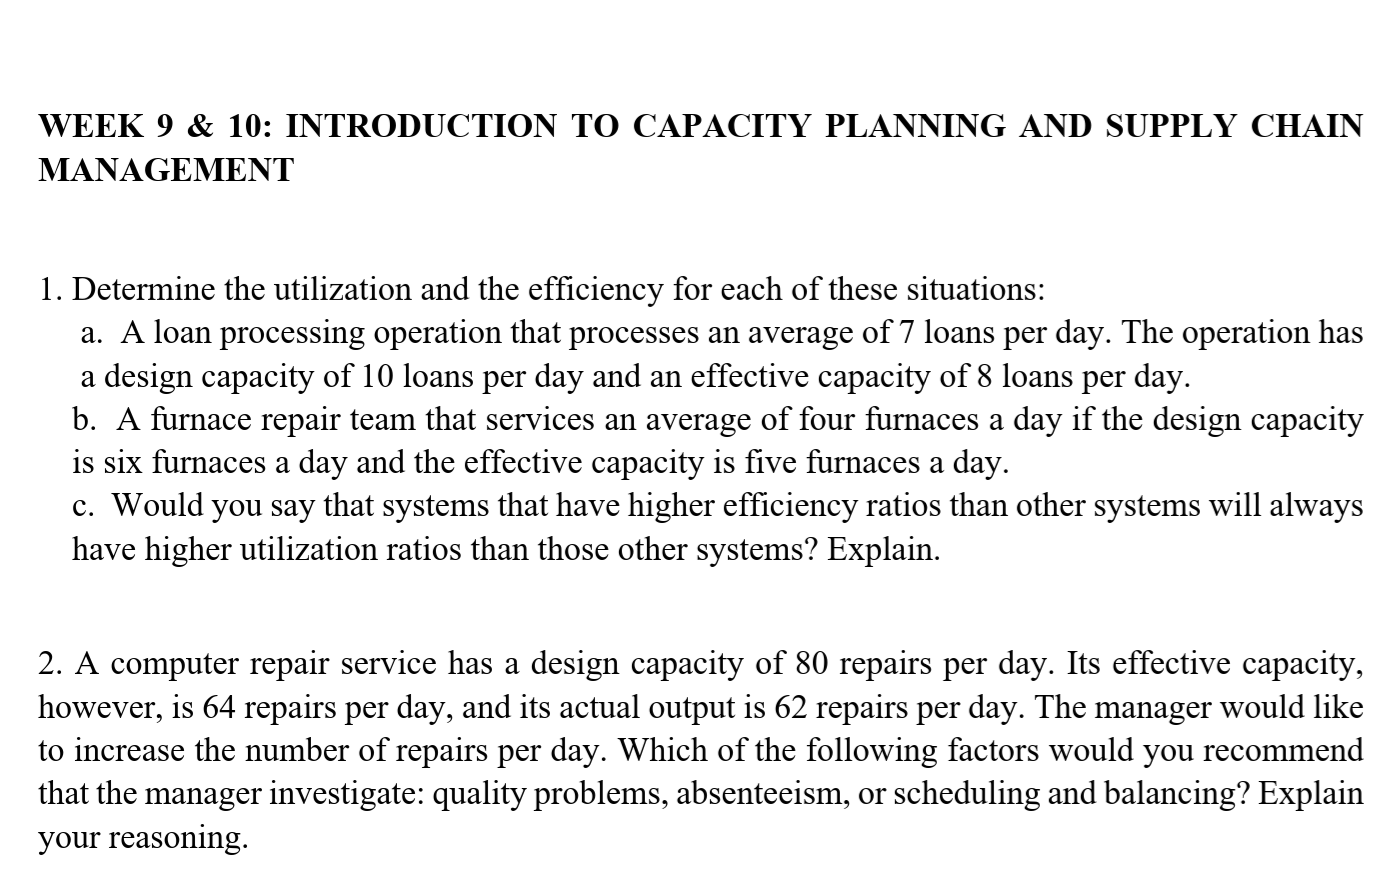 WEEK 9 & 10: INTRODUCTION TO CAPACITY PLANNING AND SUPPLY CHAIN
MANAGEMENT
1. Determine the utilization and the efficiency for each of these situations:
a. A loan processing operation that processes an average of 7 loans per day. The operation has
a design capacity of 10 loans per day and an effective capacity of 8 loans per day.
b. A furnace repair team that services an average of four furnaces a day if the design capacity
is six furnaces a day and the effective capacity is five furnaces a day.
c. Would you say that systems that have higher efficiency ratios than other systems will always
have higher utilization ratios than those other systems? Explain.
2. A computer repair service has a design capacity of 80 repairs per day. Its effective capacity,
however, is 64 repairs per day, and its actual output is 62 repairs per day. The manager would like
to increase the number of repairs per day. Which of the following factors would you recommend
that the manager investigate: quality problems, absenteeism, or scheduling and balancing? Explain
your reasoning.
